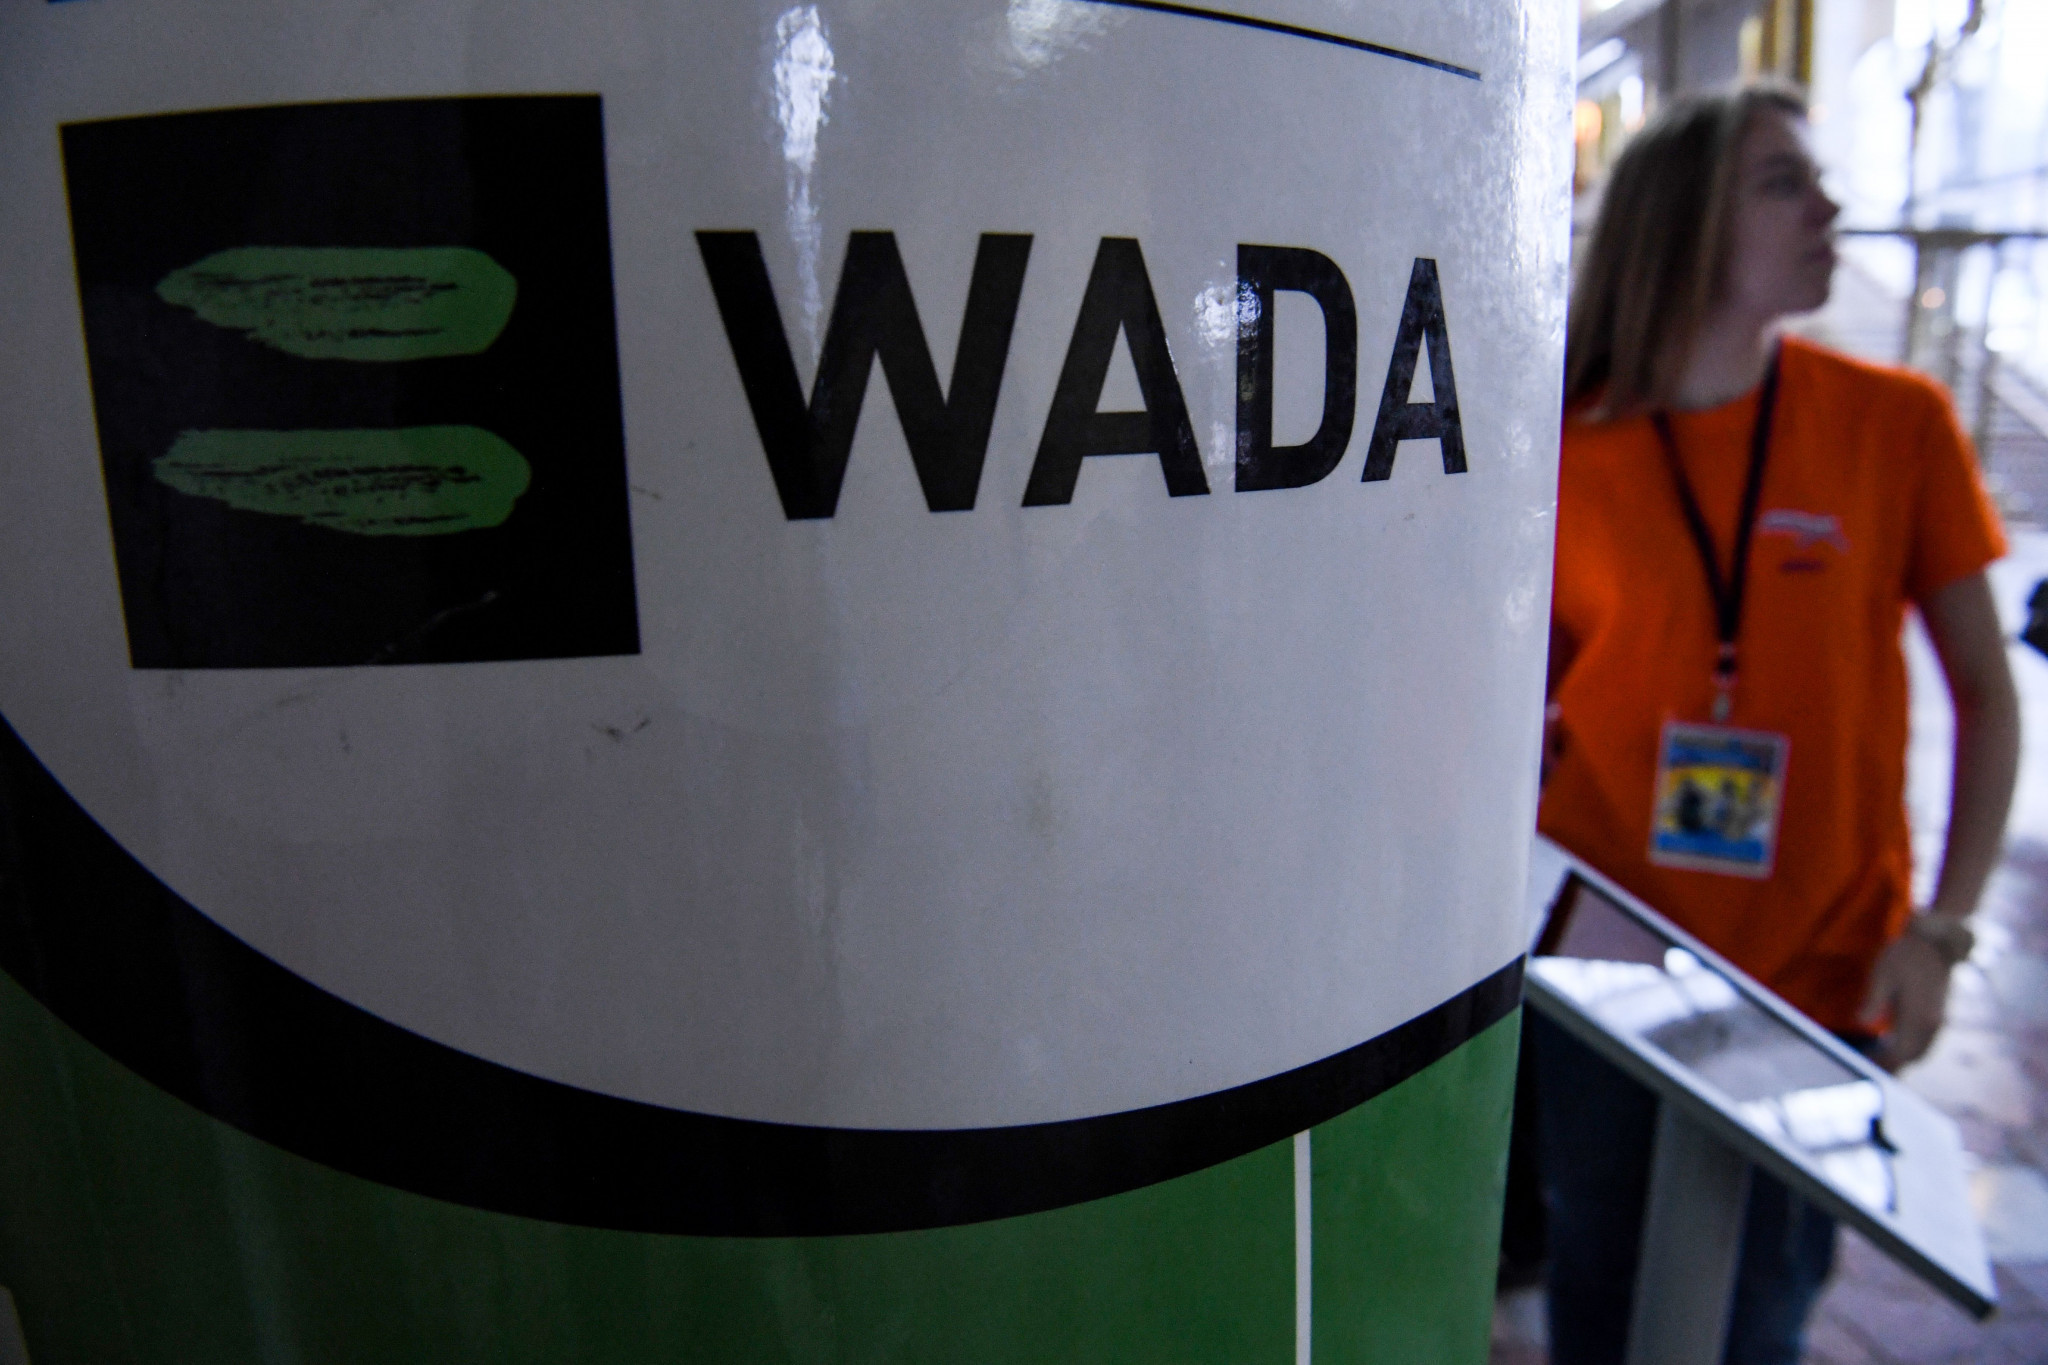 Indonesia given green light to host major events as WADA removes it from non-compliance list